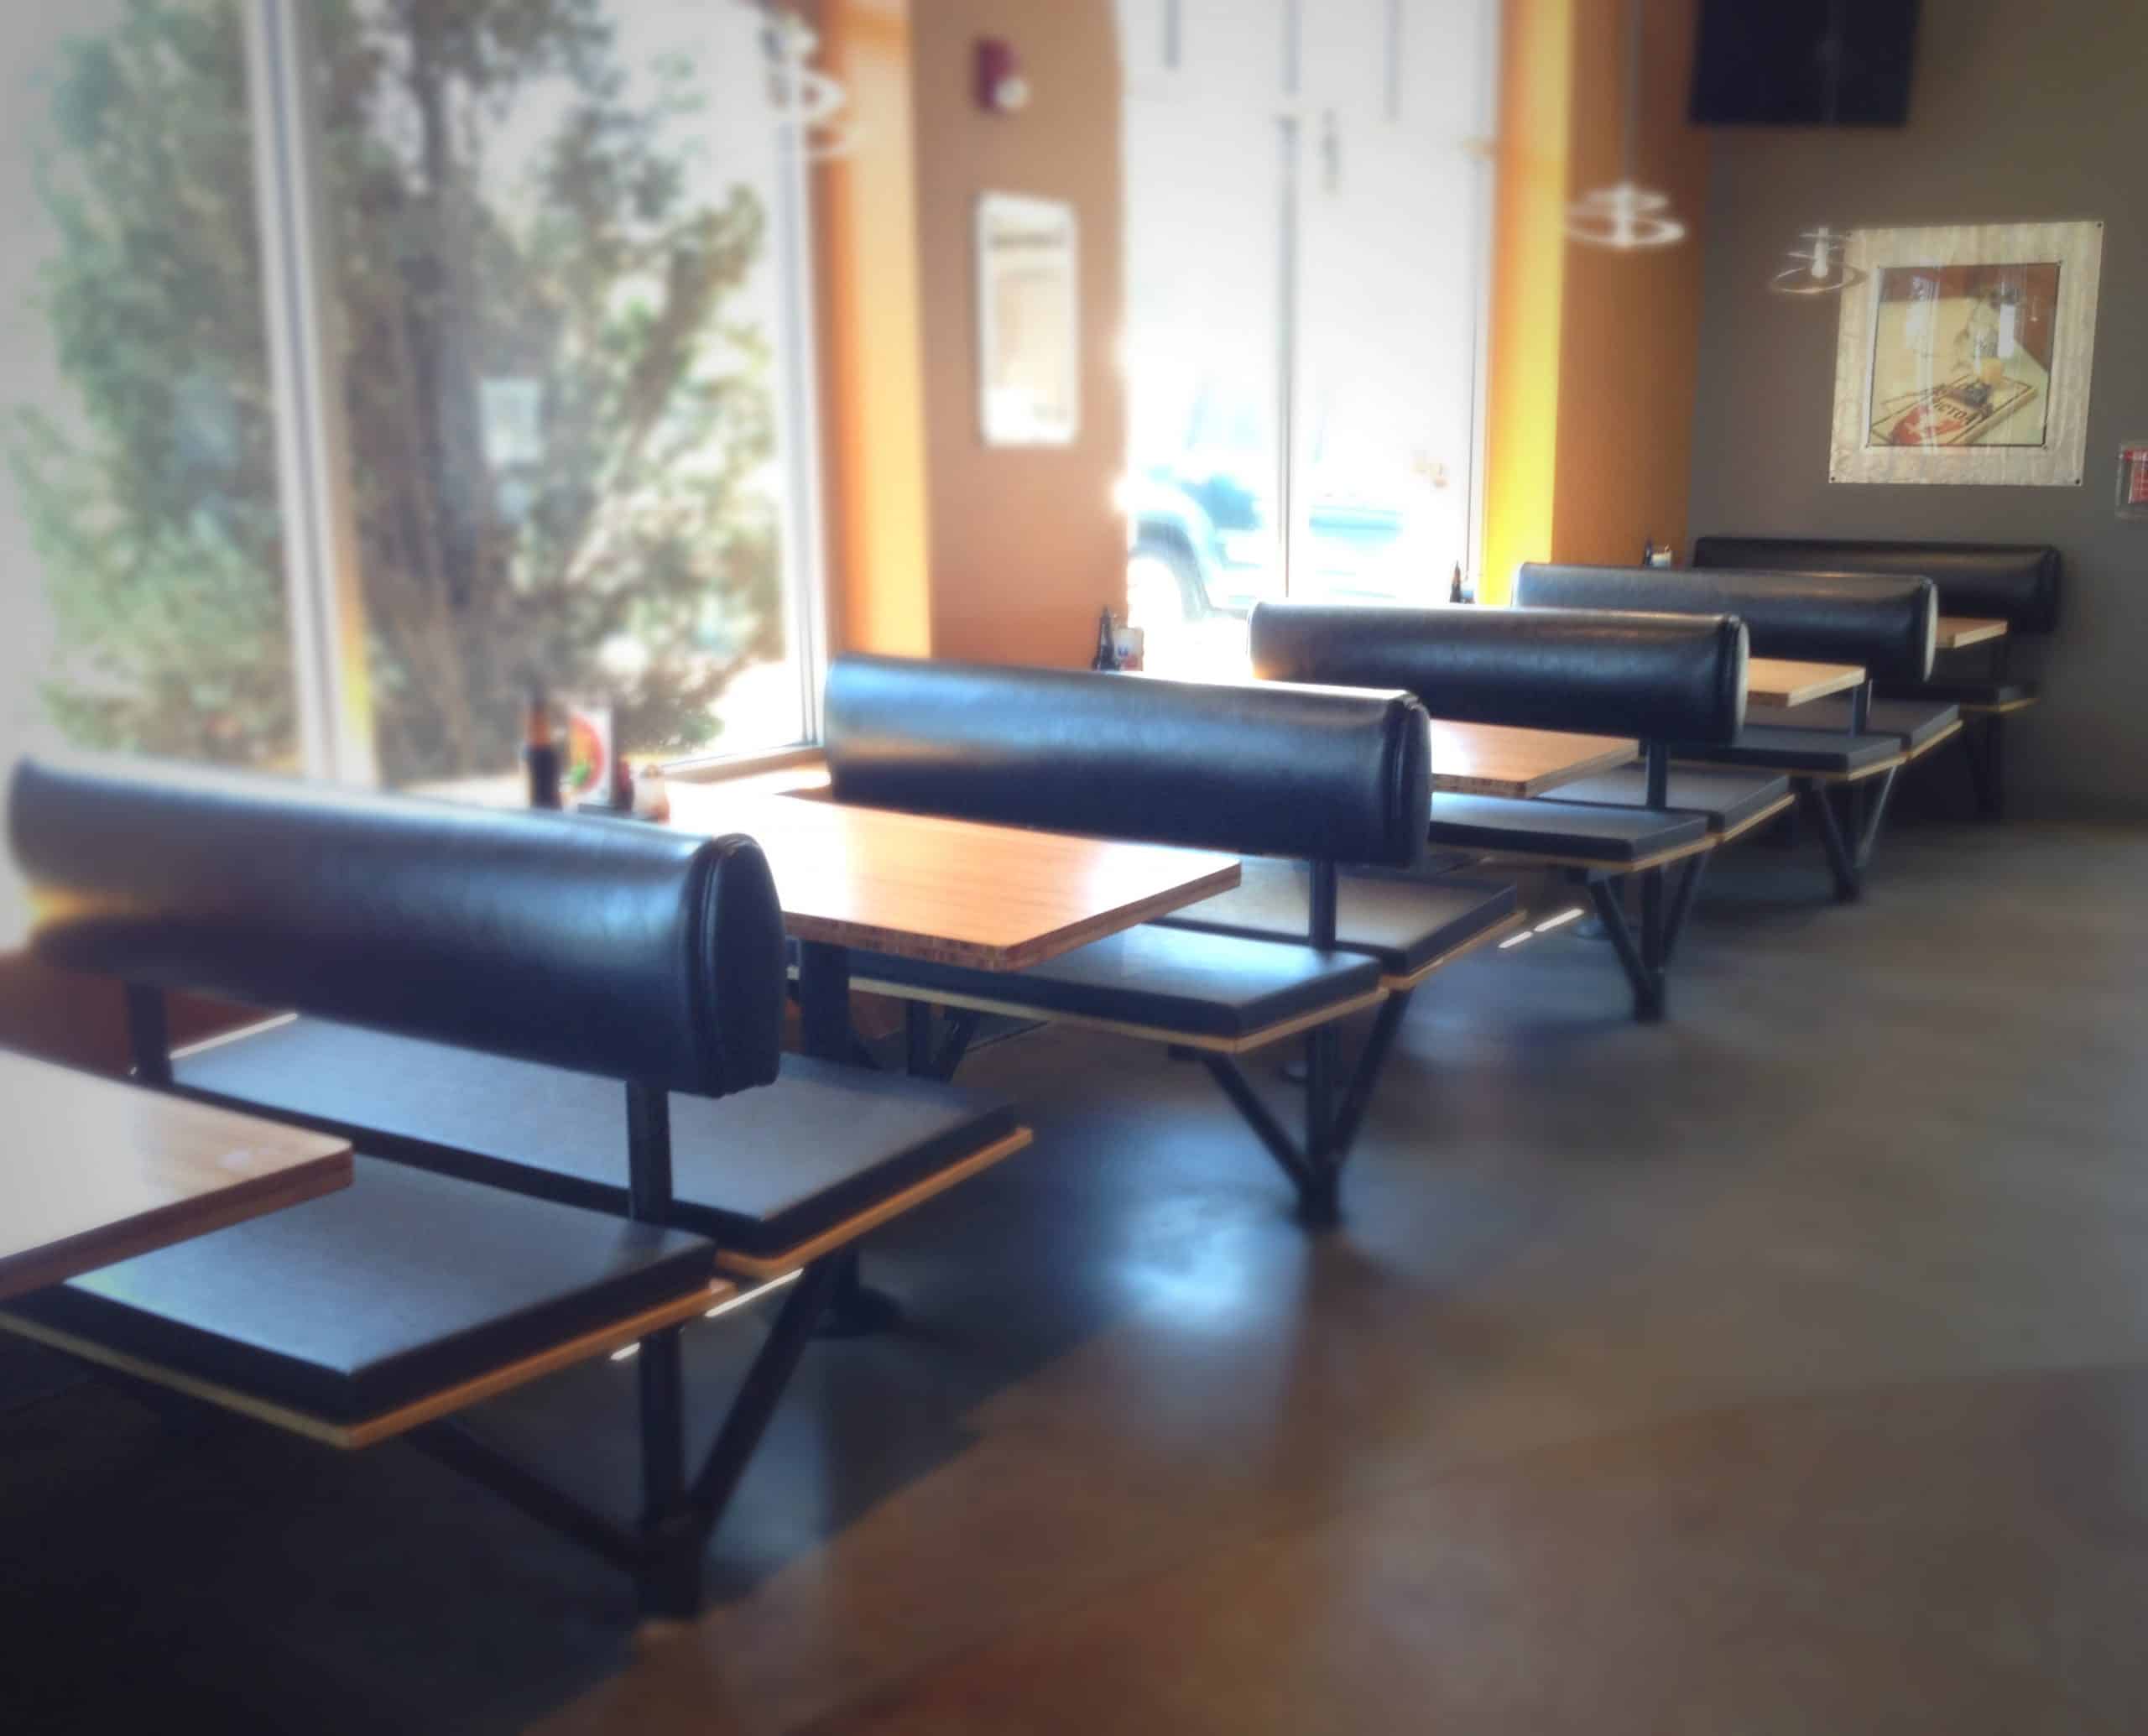 Restaurant Seating Remodel with New Booth Seat Cushions in NaugaSoft Black Satin